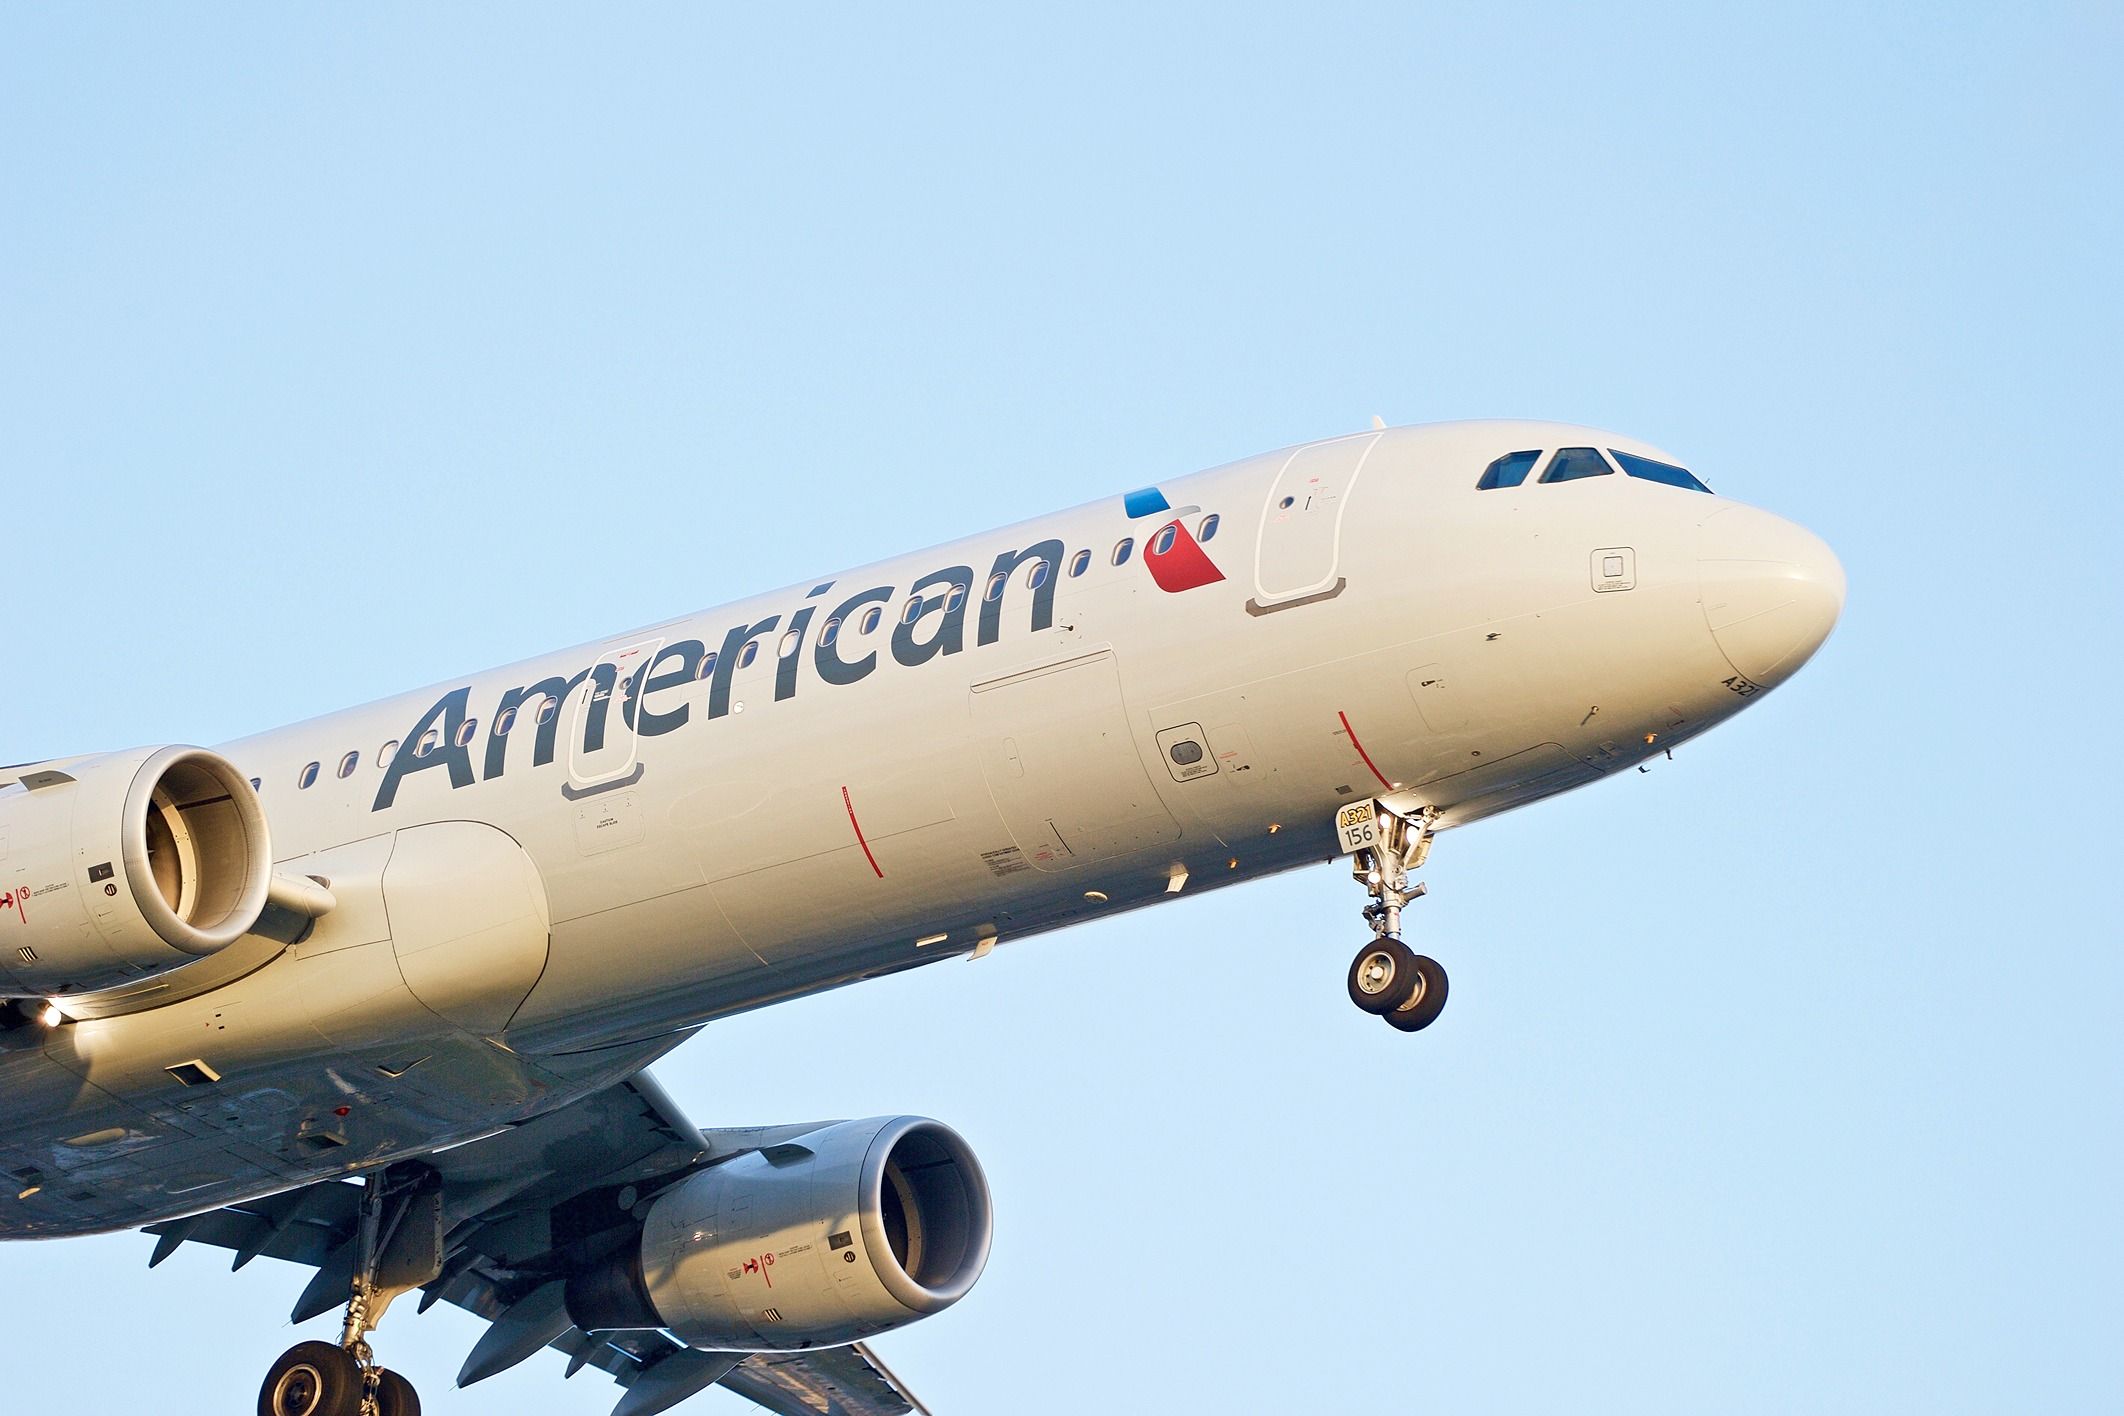 American Airlines Airbus A321 landing